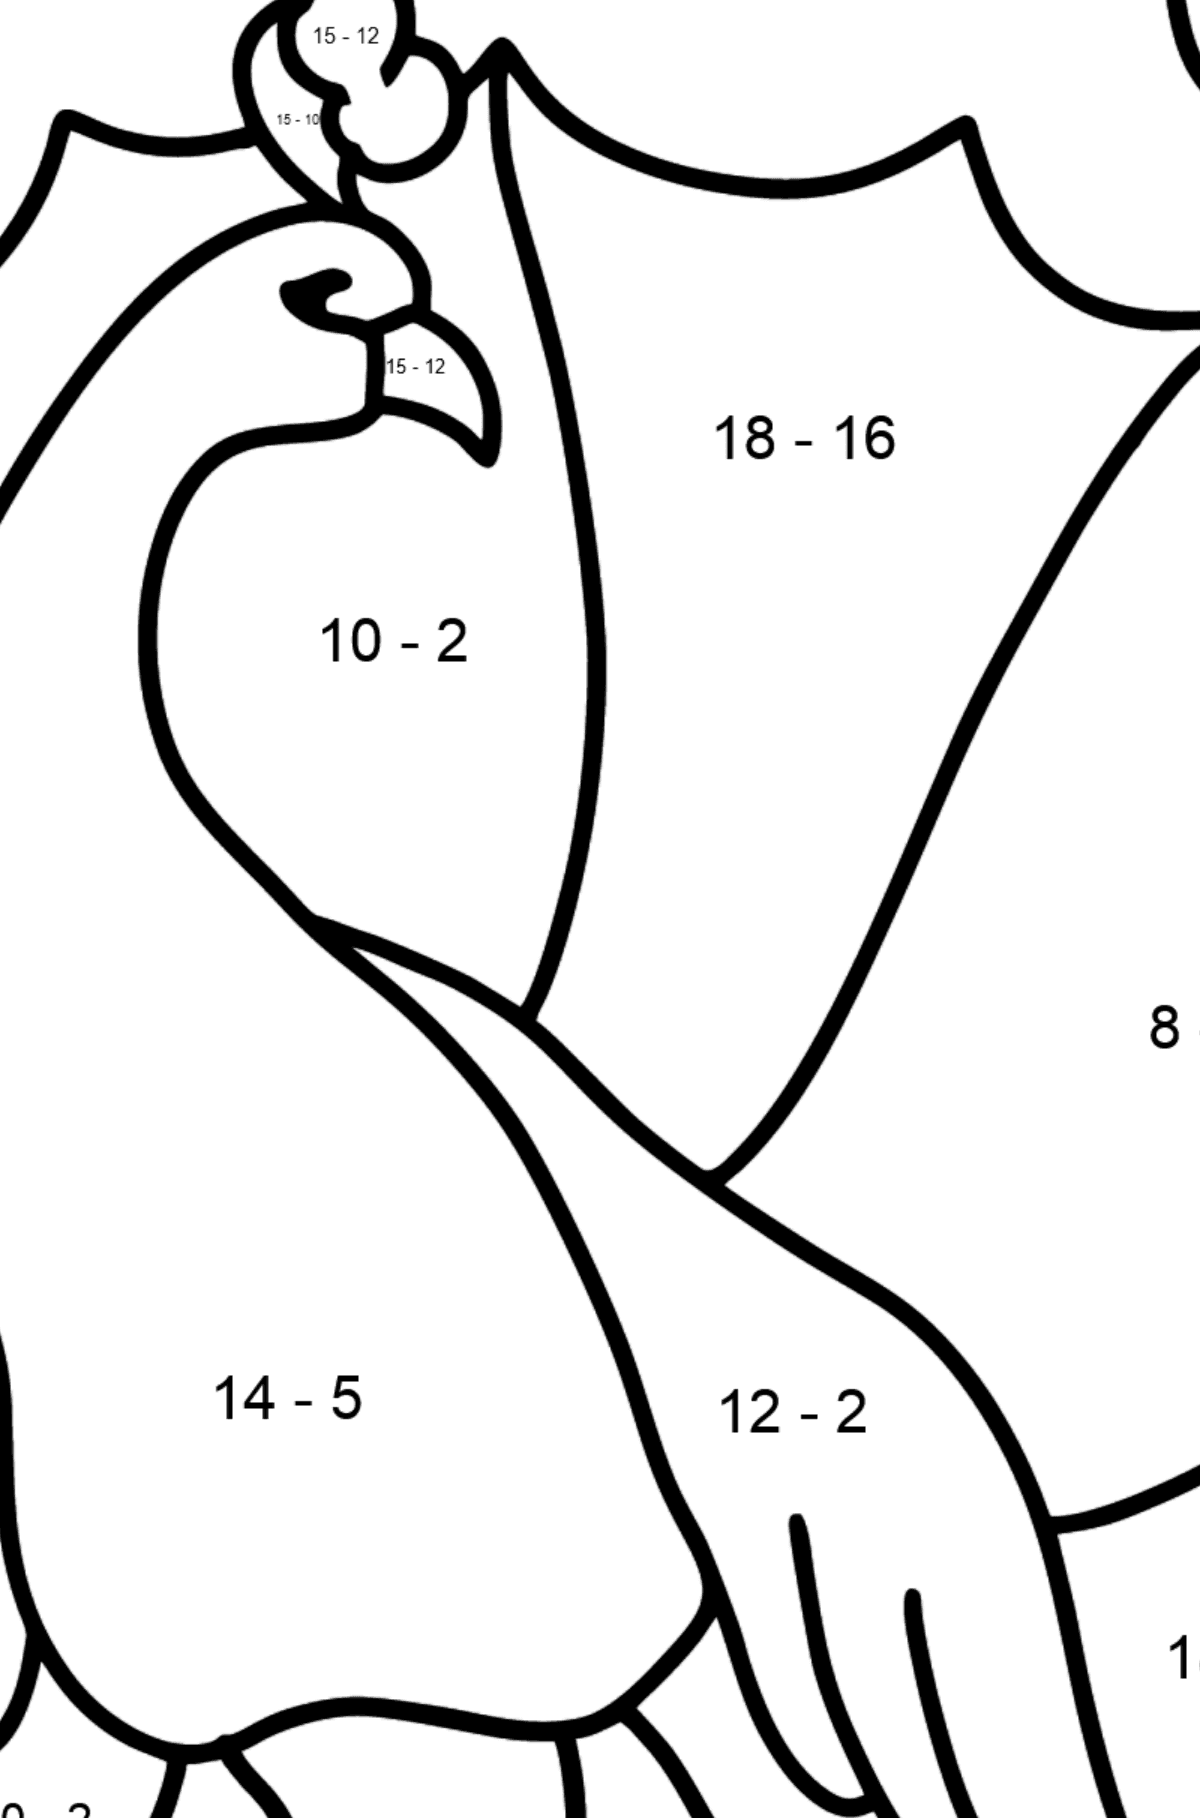 Peacock coloring page - Math Coloring - Subtraction for Kids